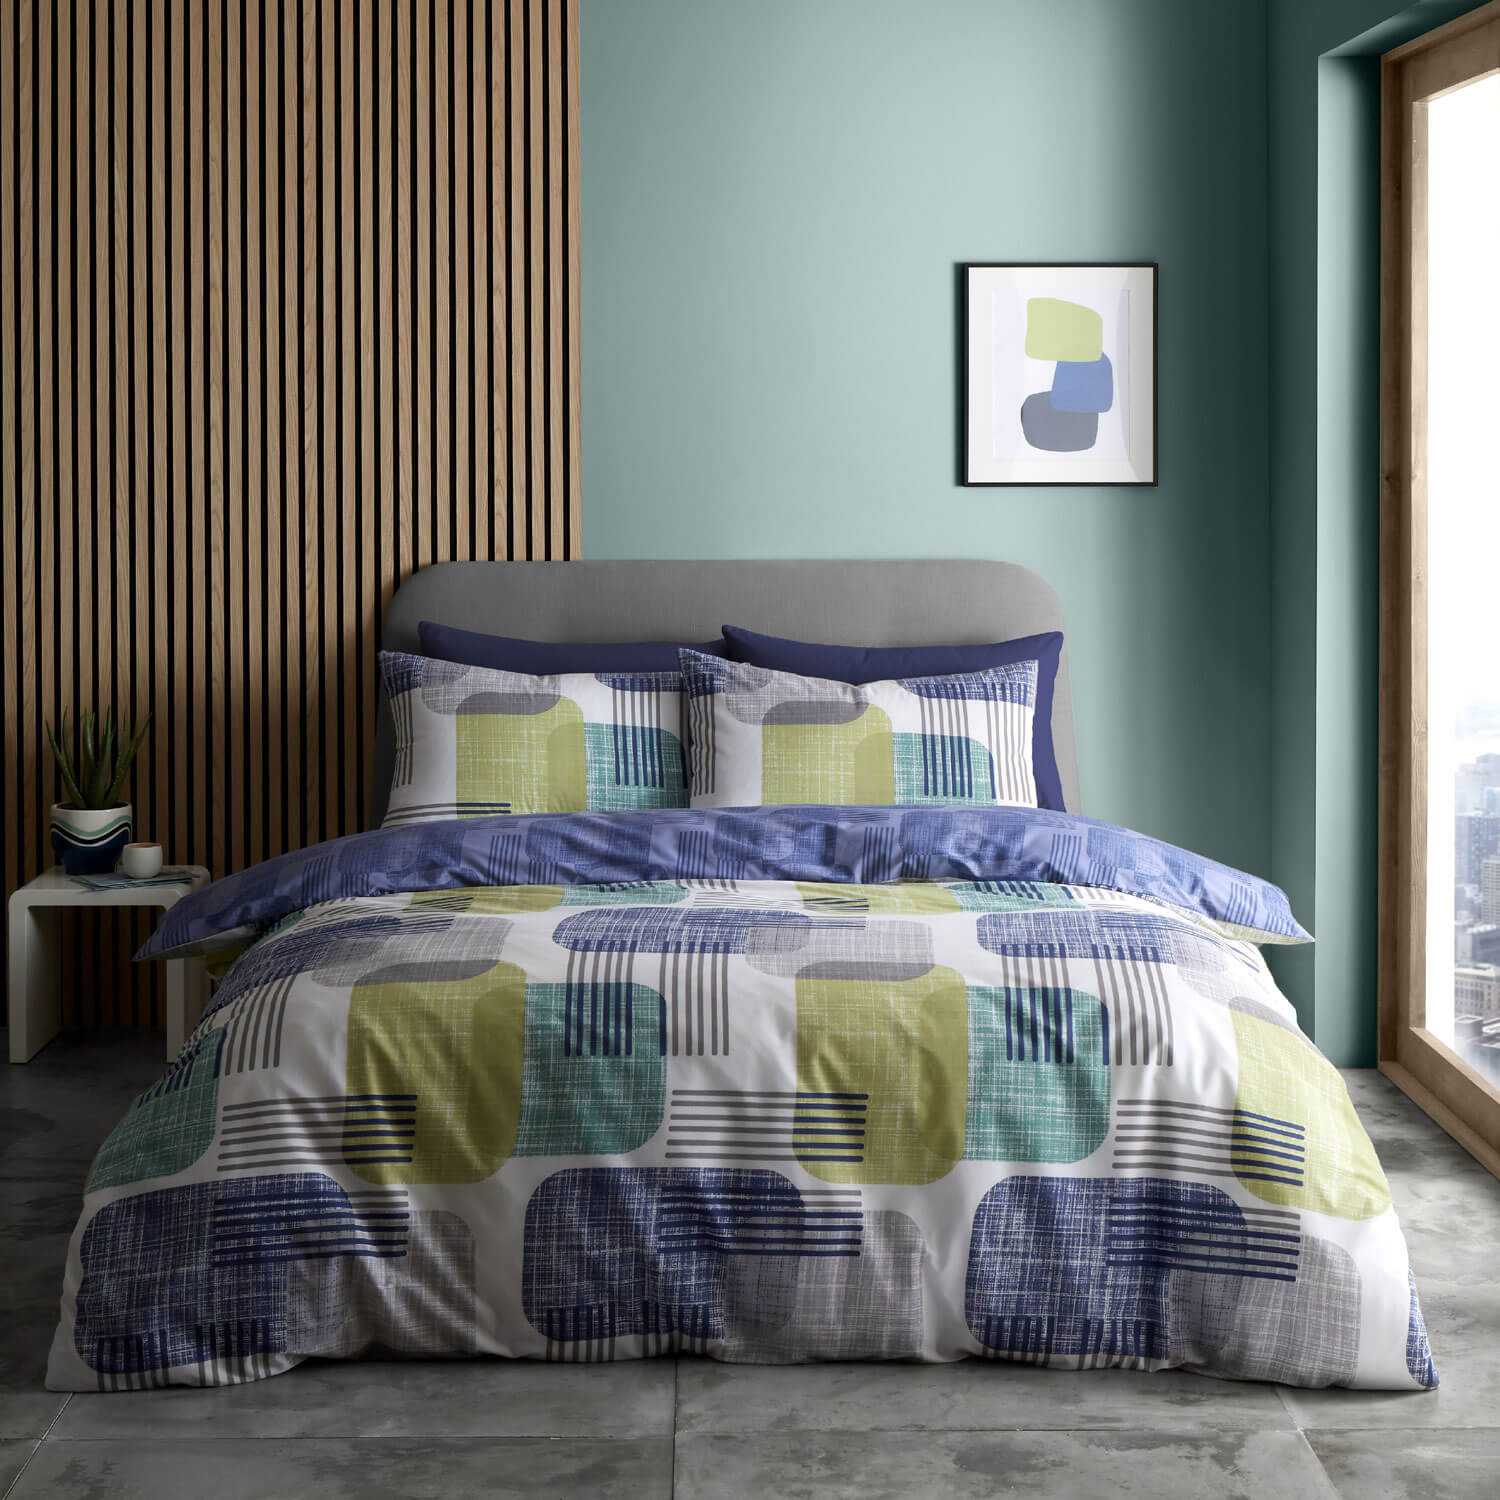  The Home Collection Layered Geo Duvet Cover Set 1 Shaws Department Stores